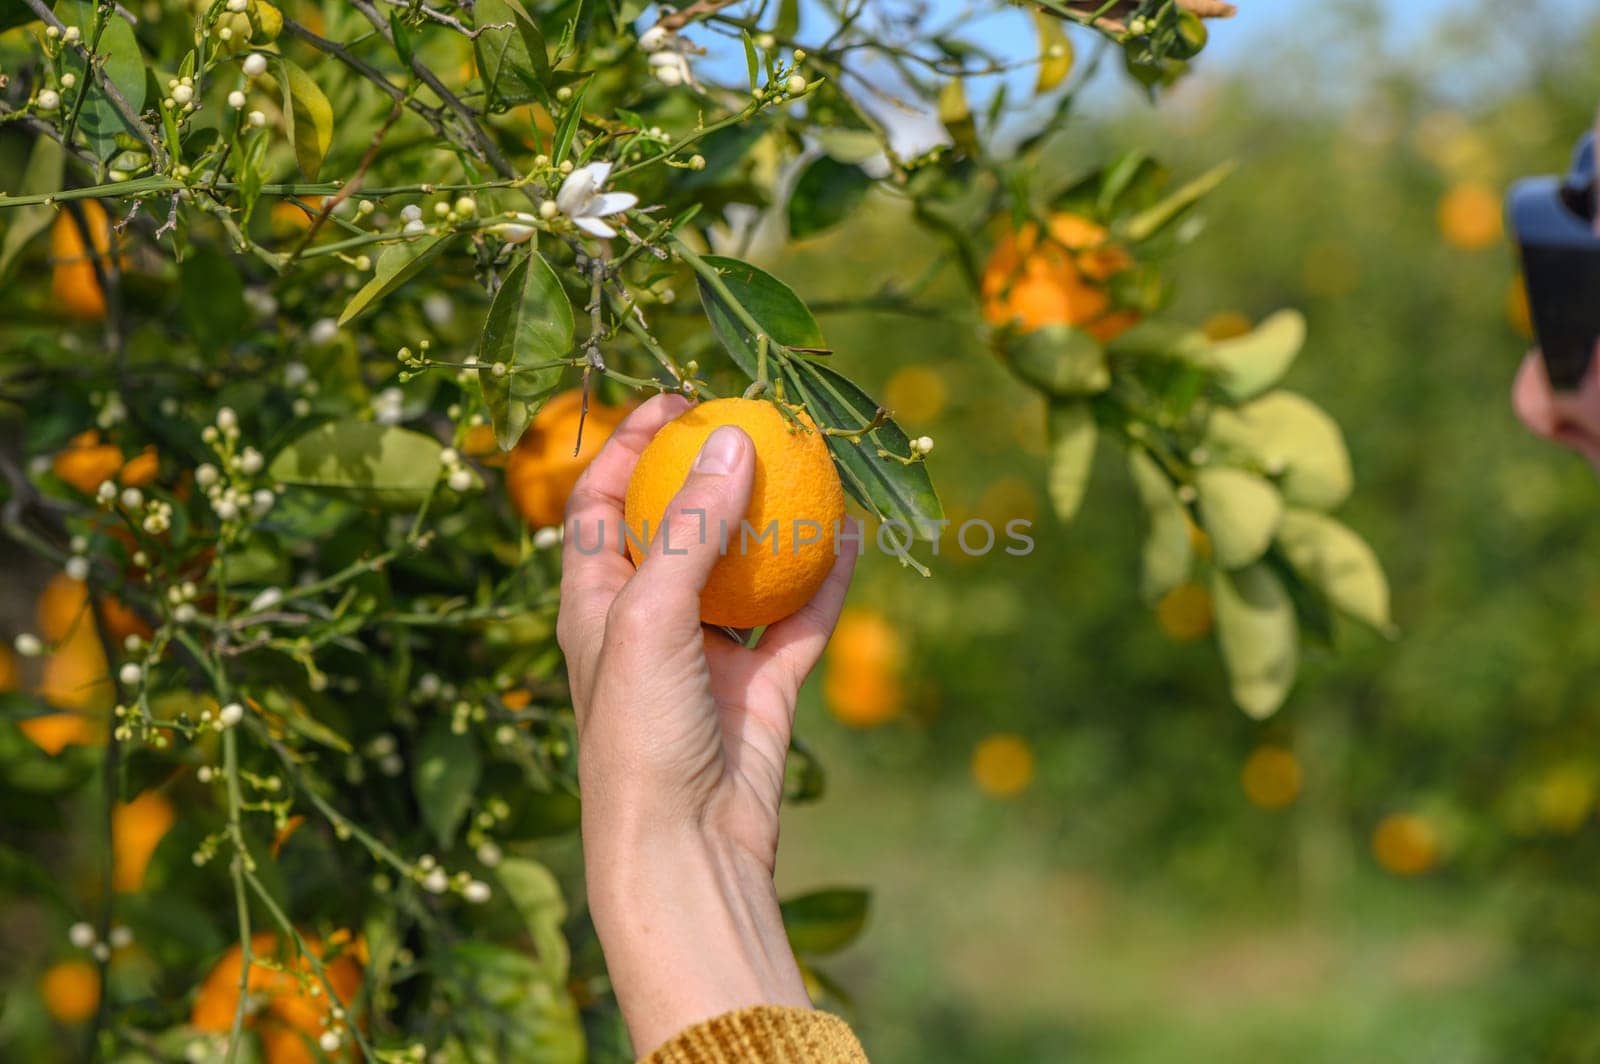 Women's hands pick juicy tasty oranges from a tree in the garden, harvesting on a sunny day. 7